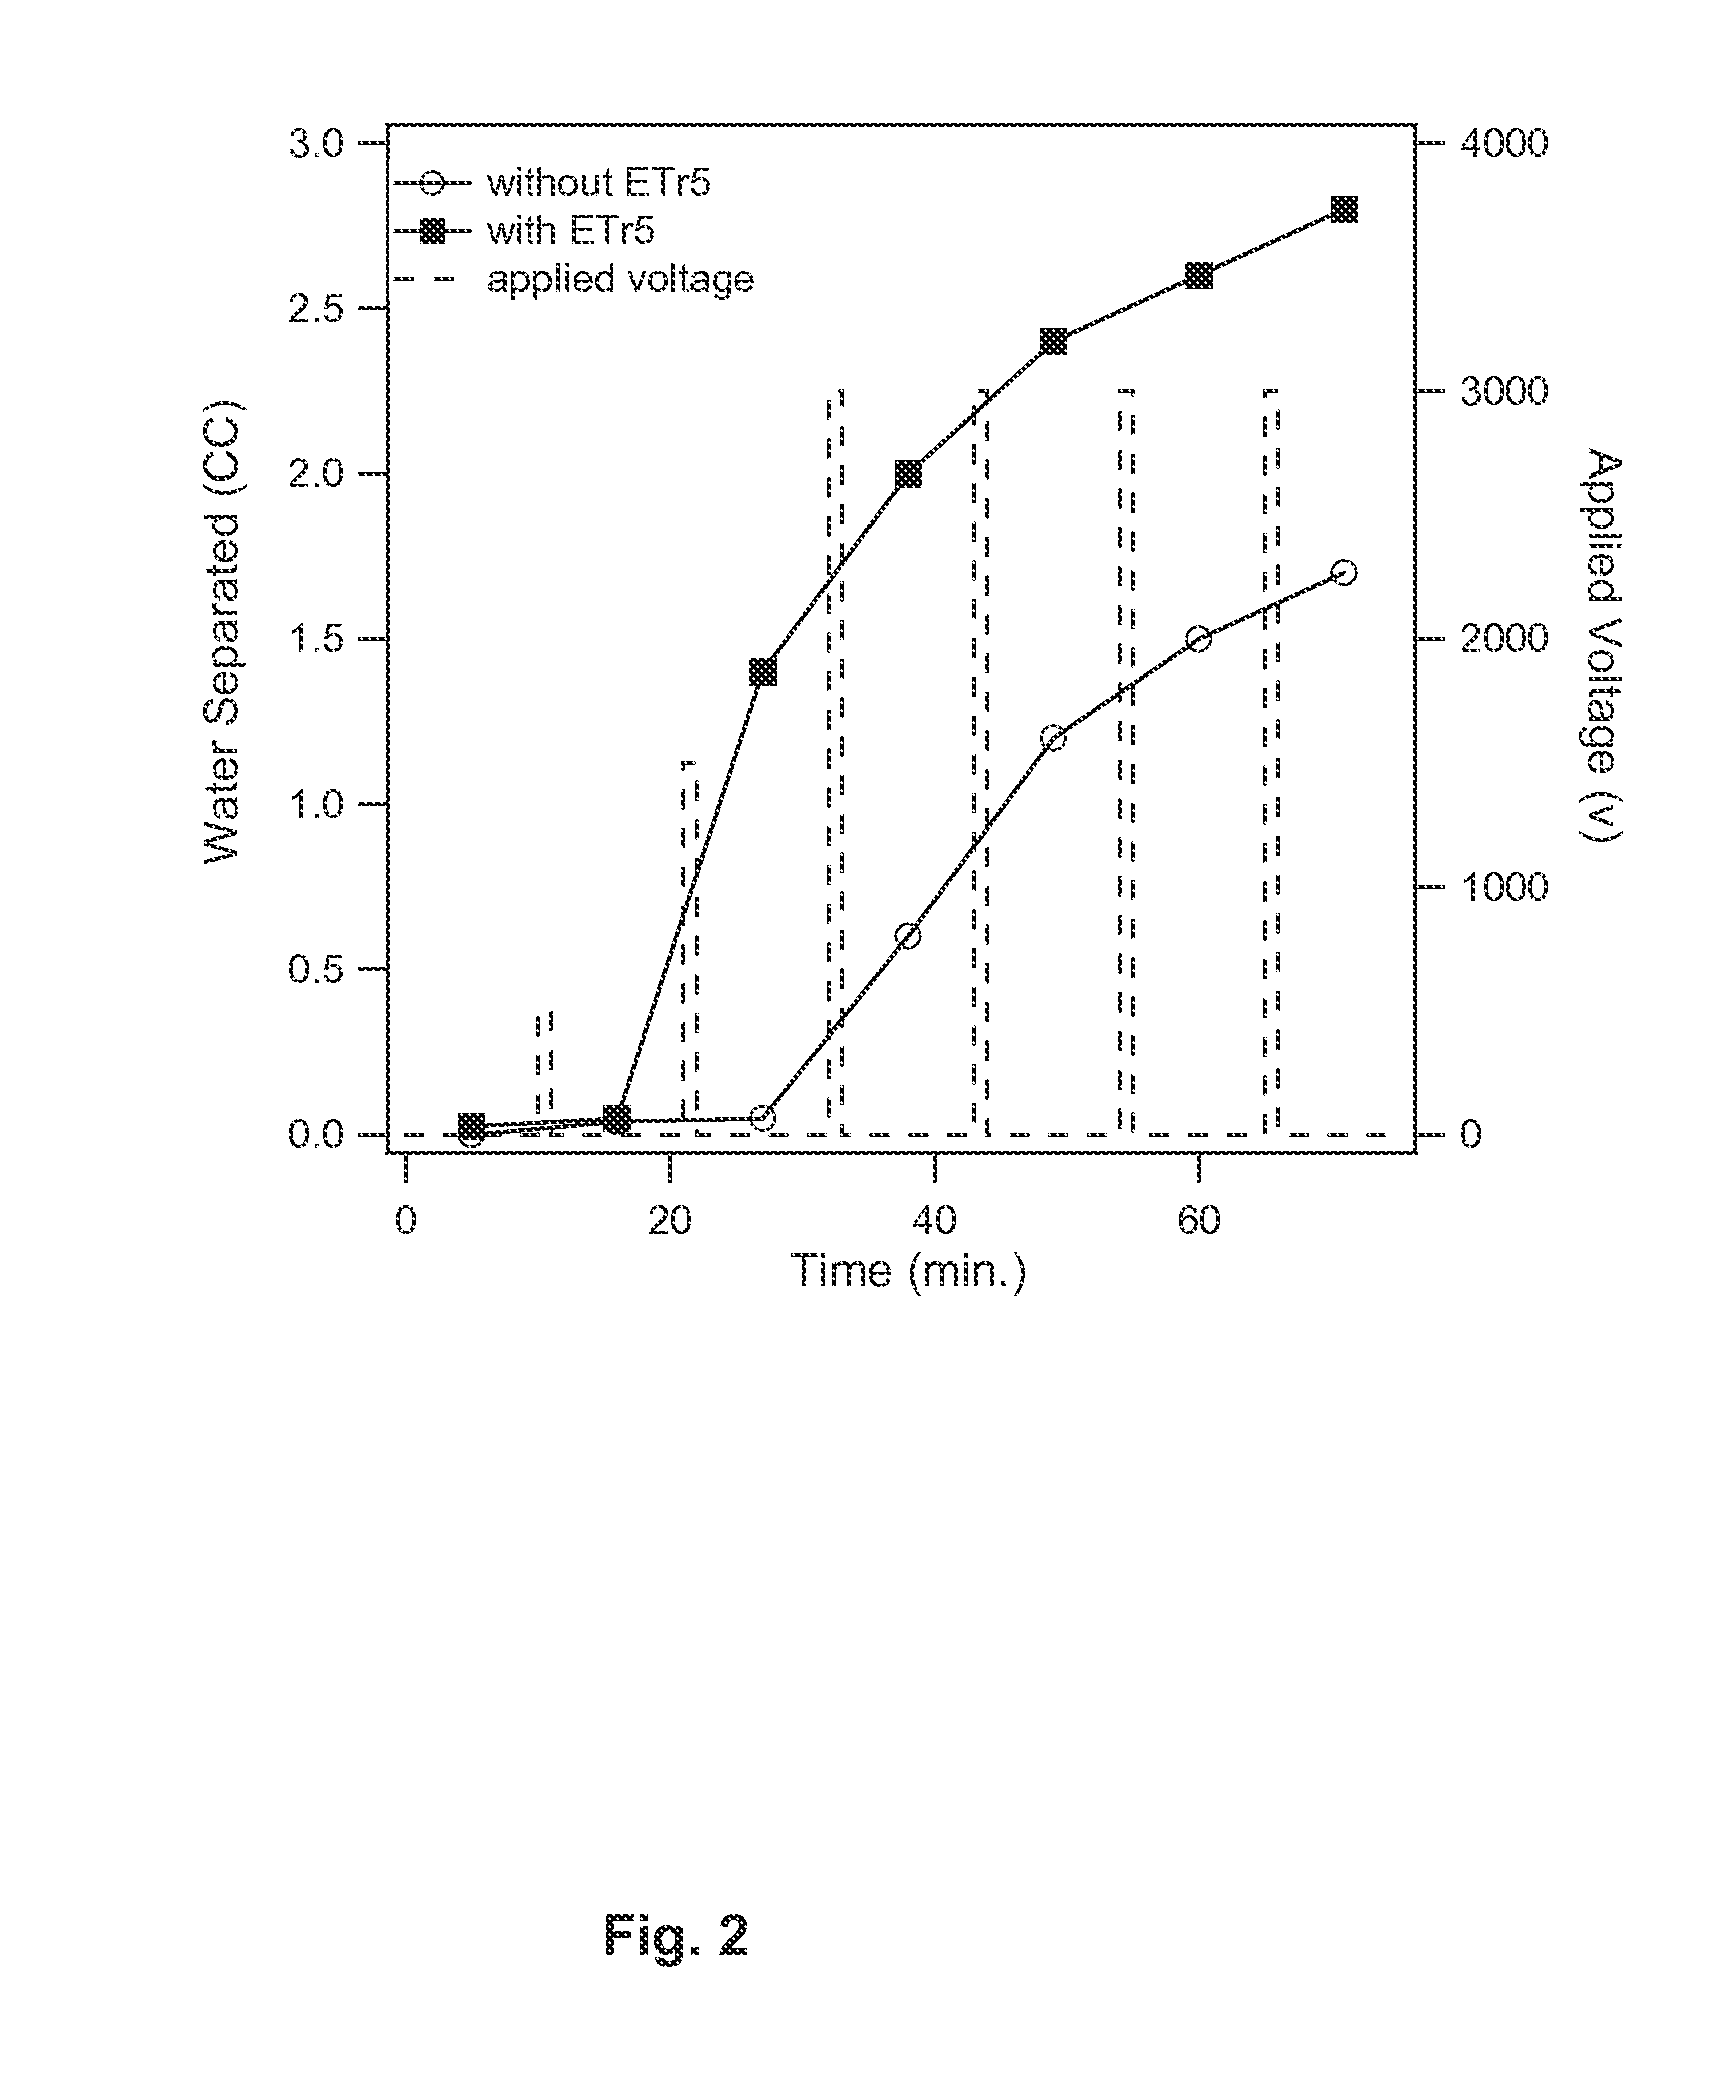 Desalter emulsion separation by emulsion recycle